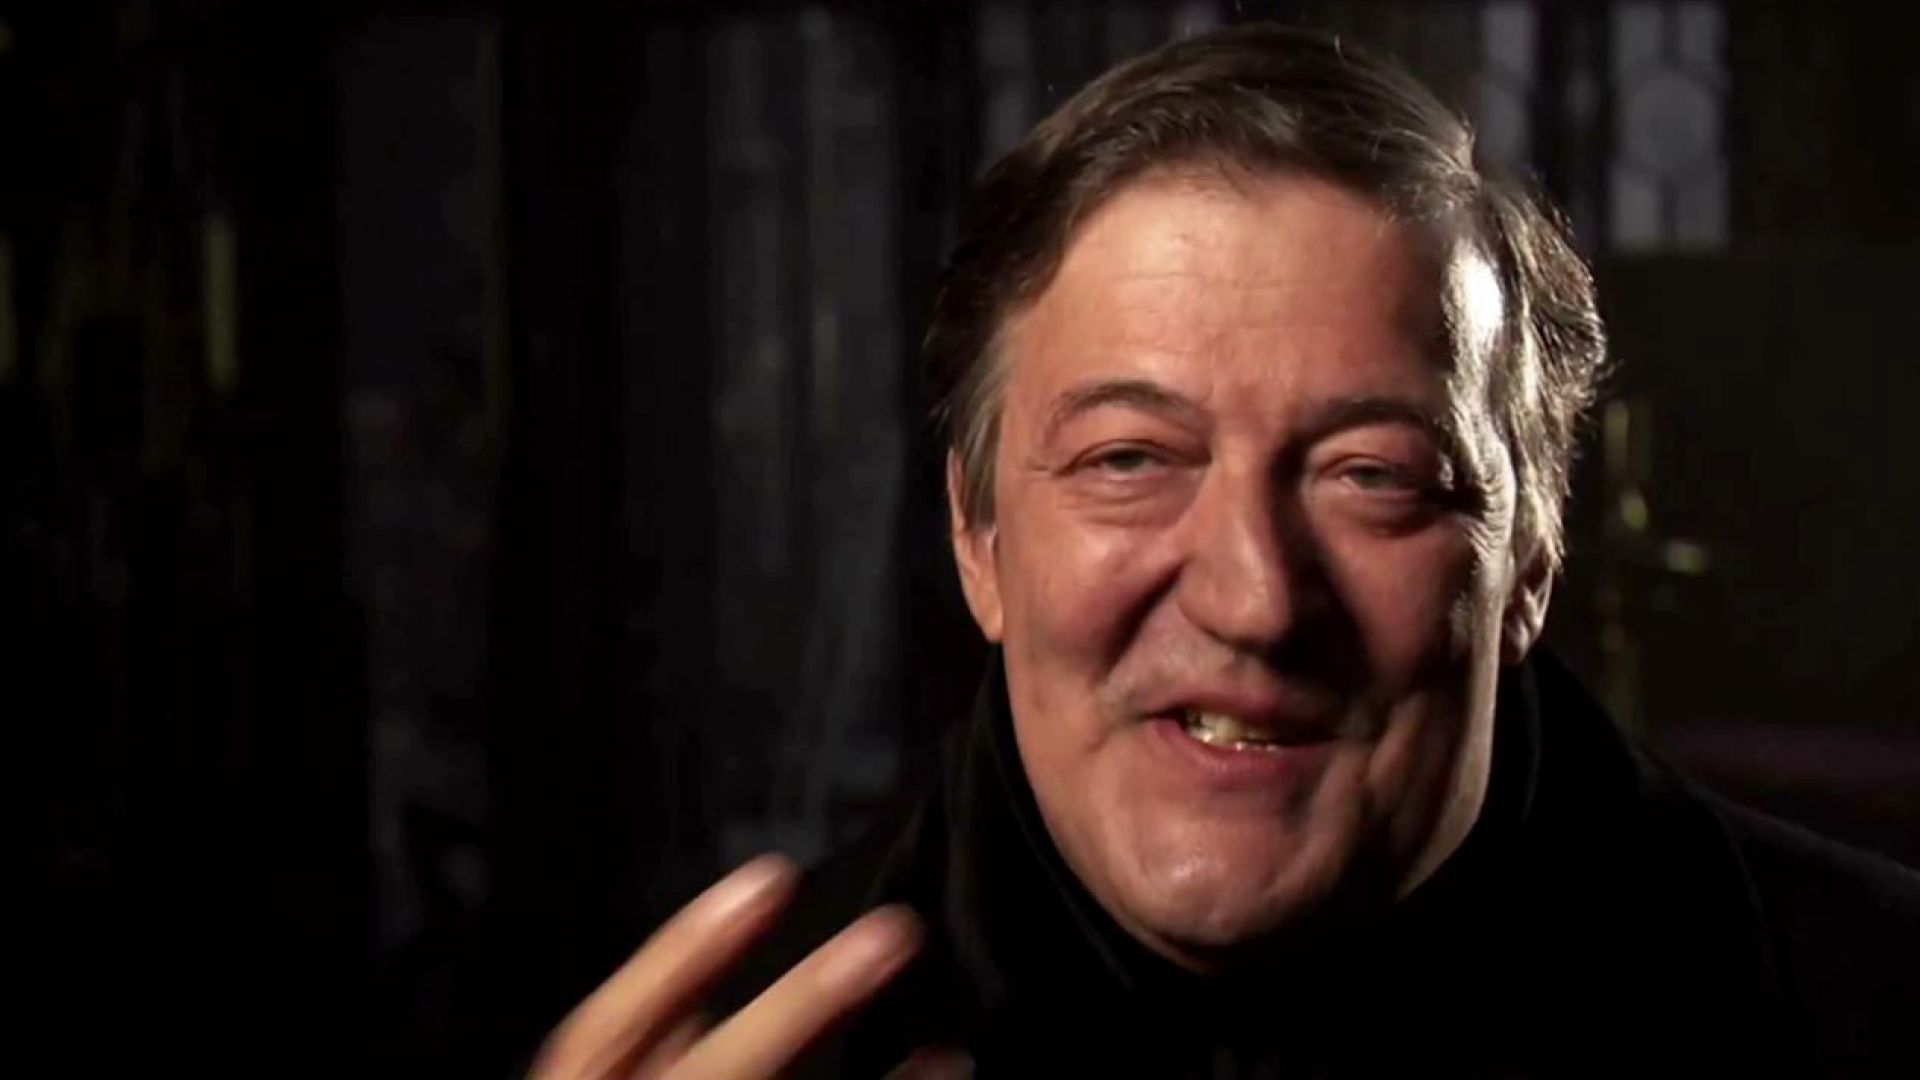 Stephen Fry on Robert Downey Jr&#039;s withering looks and playing his brother in Sherlock Holmes 2